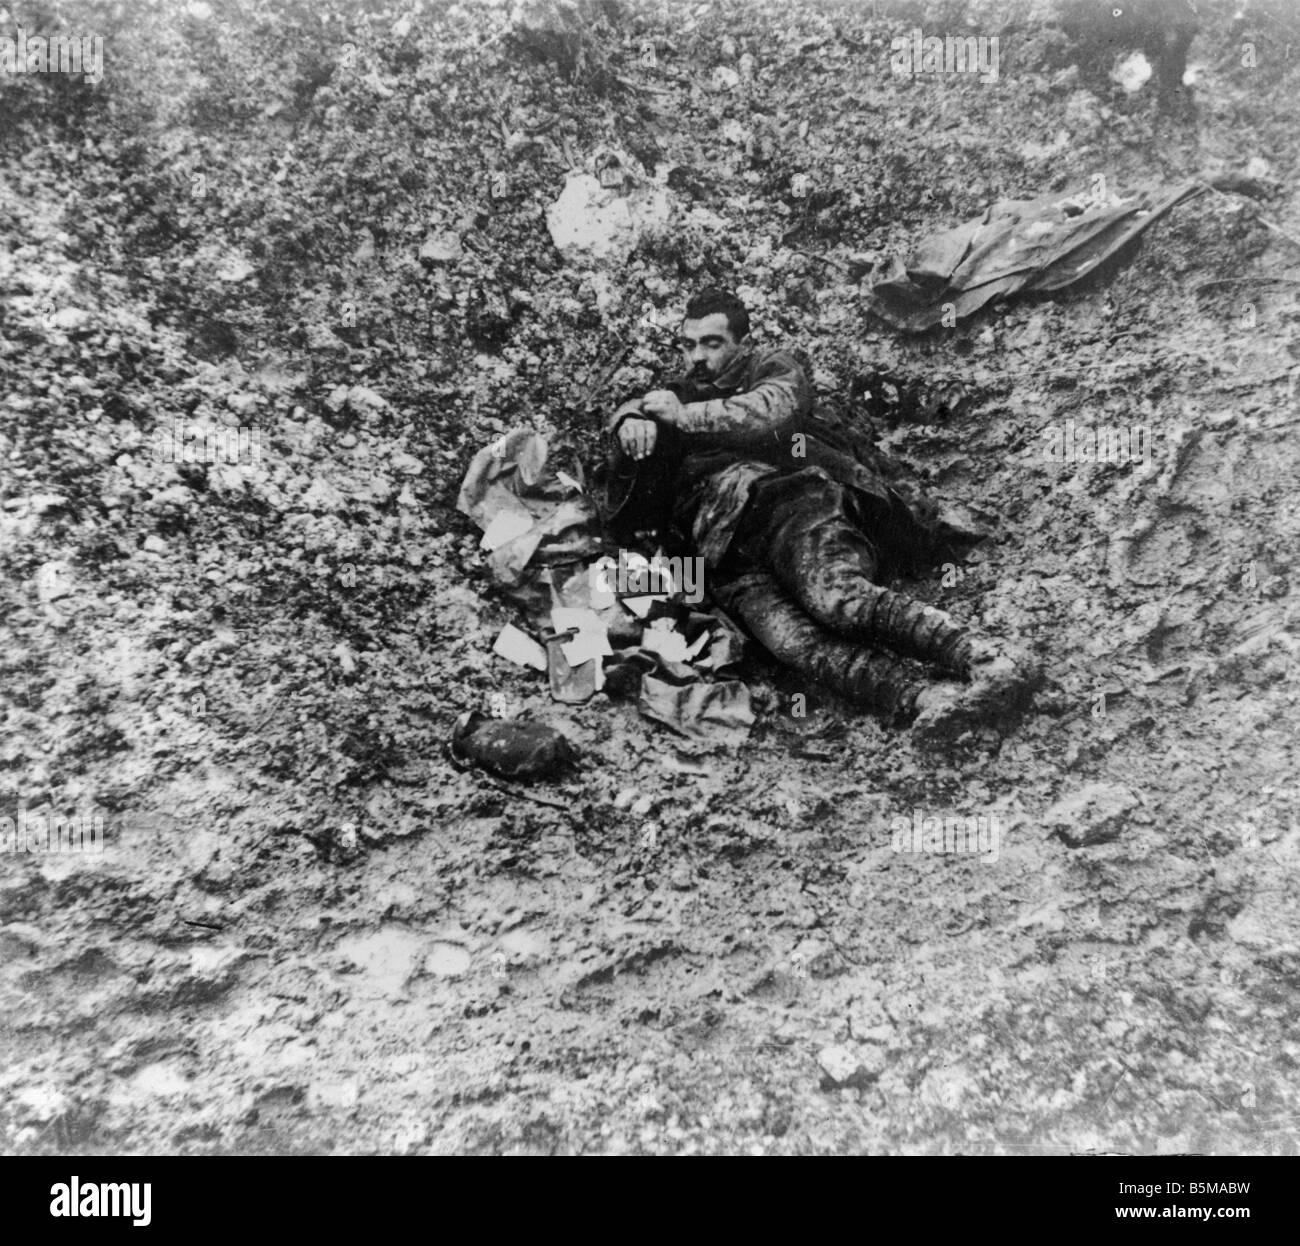 2 G55 W1 1916 25 German soldier killed Douaumont History WWI Western Front Trench warfare at Verdun body of a German soldier kil Stock Photo